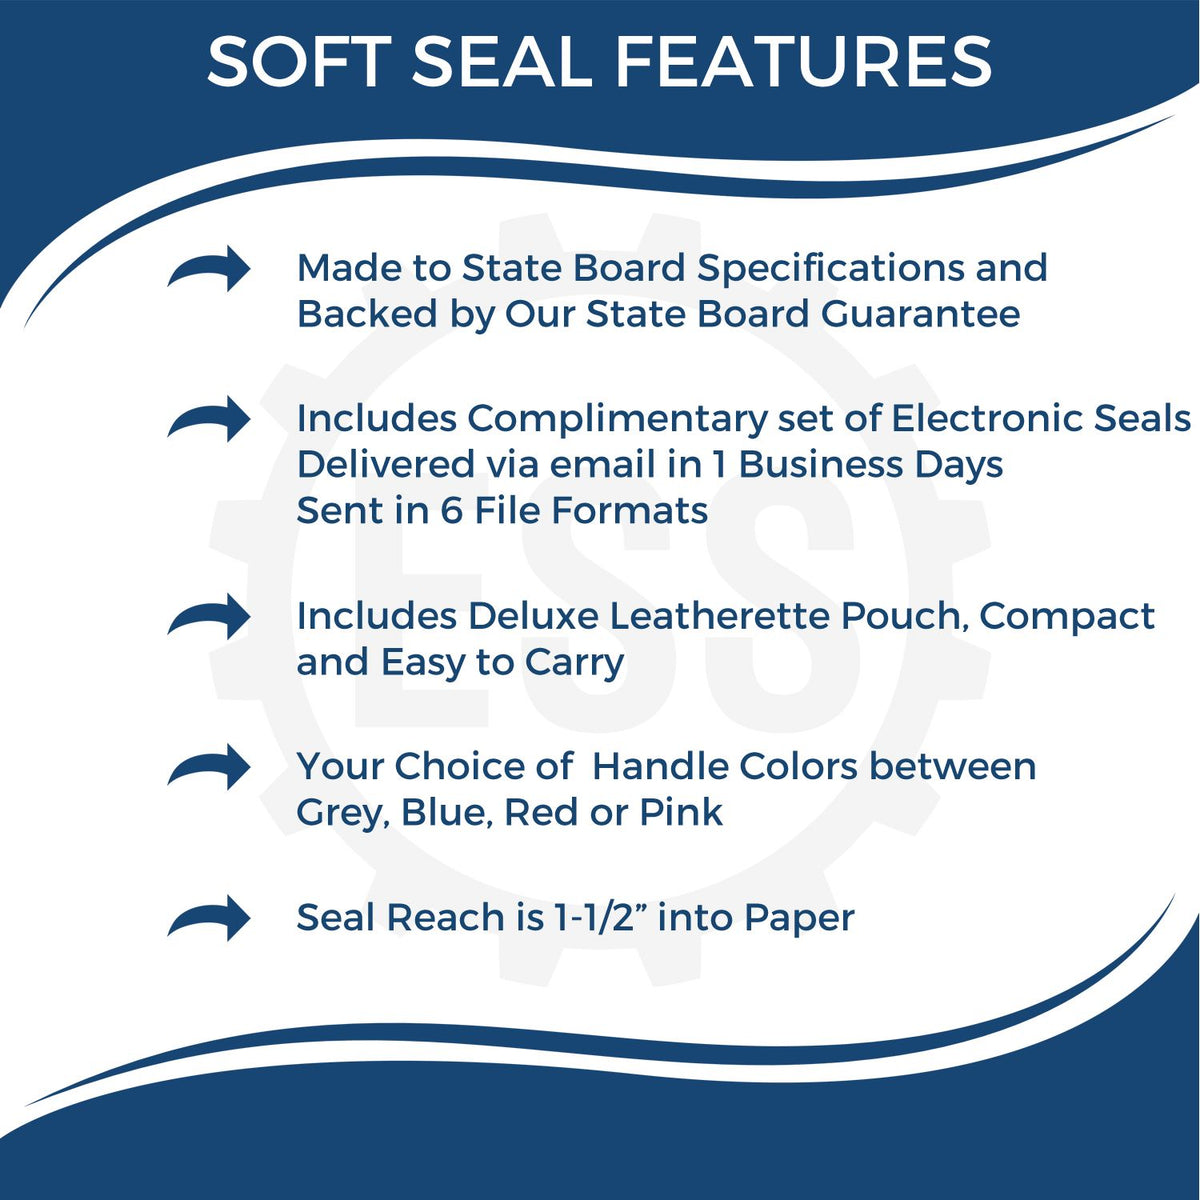 A picture of an infographic highlighting the selling points for the Soft California Professional Engineer Seal